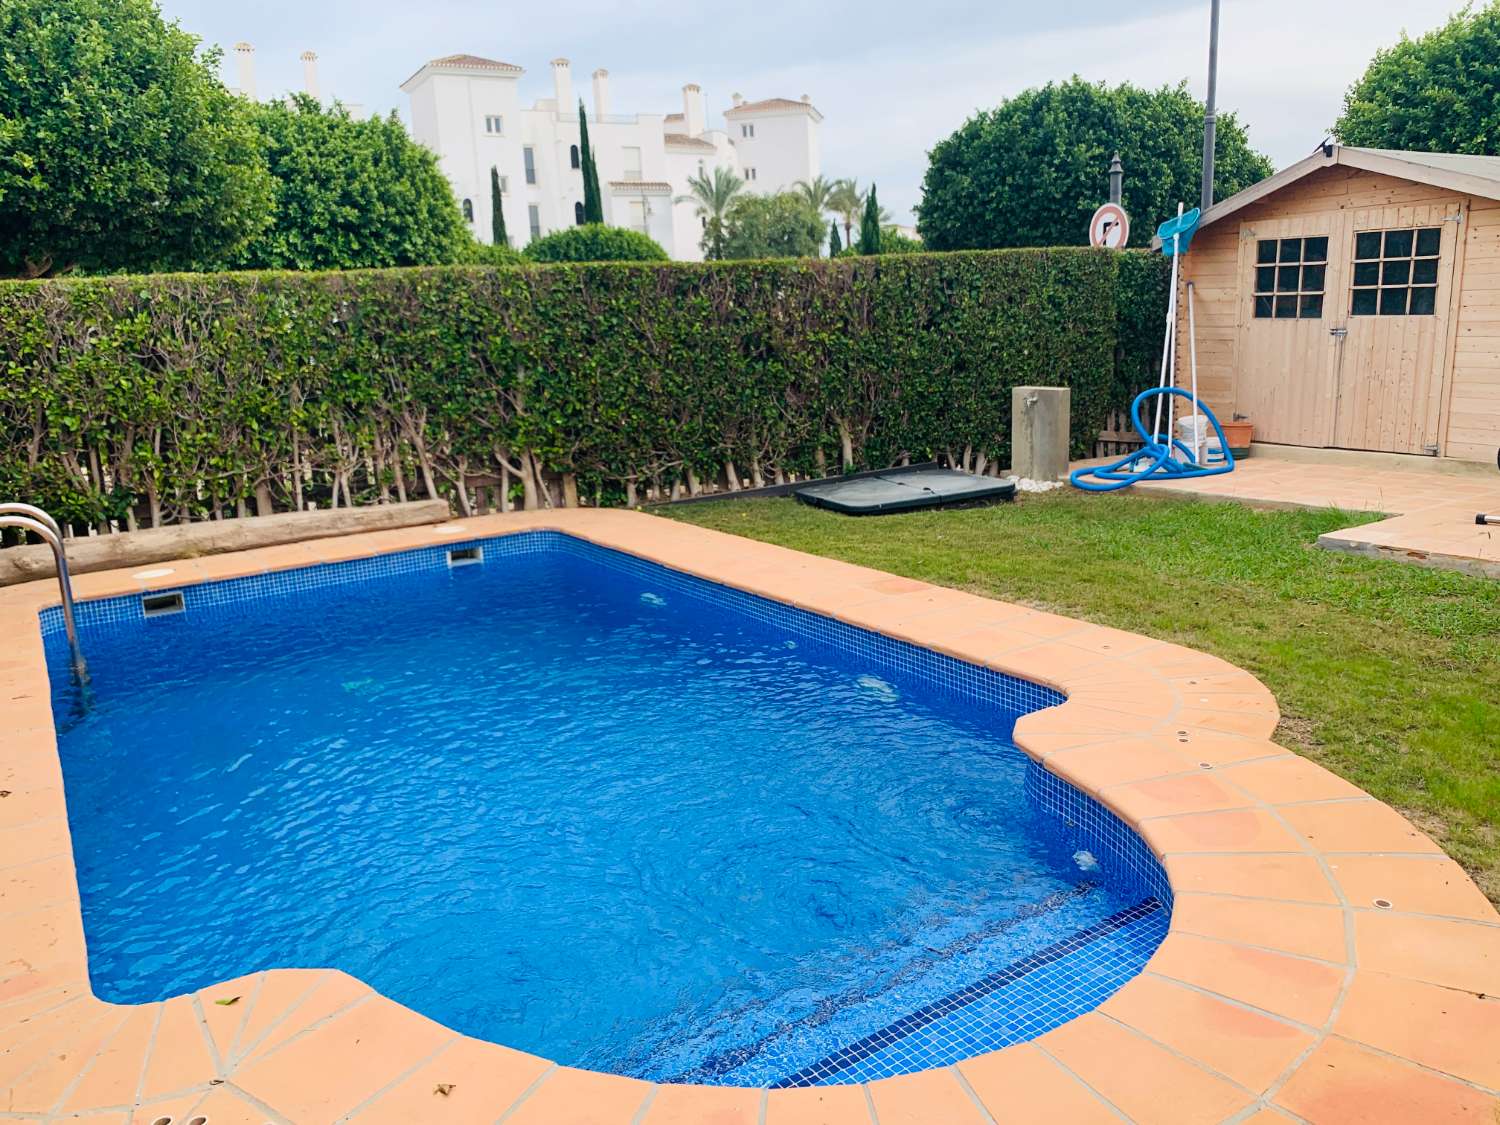 NOW YOU CAN PURCHASE THIS WONDERFUL VILLA WITH PRIVATE POOL IN LA TORRE GOLF RESORT